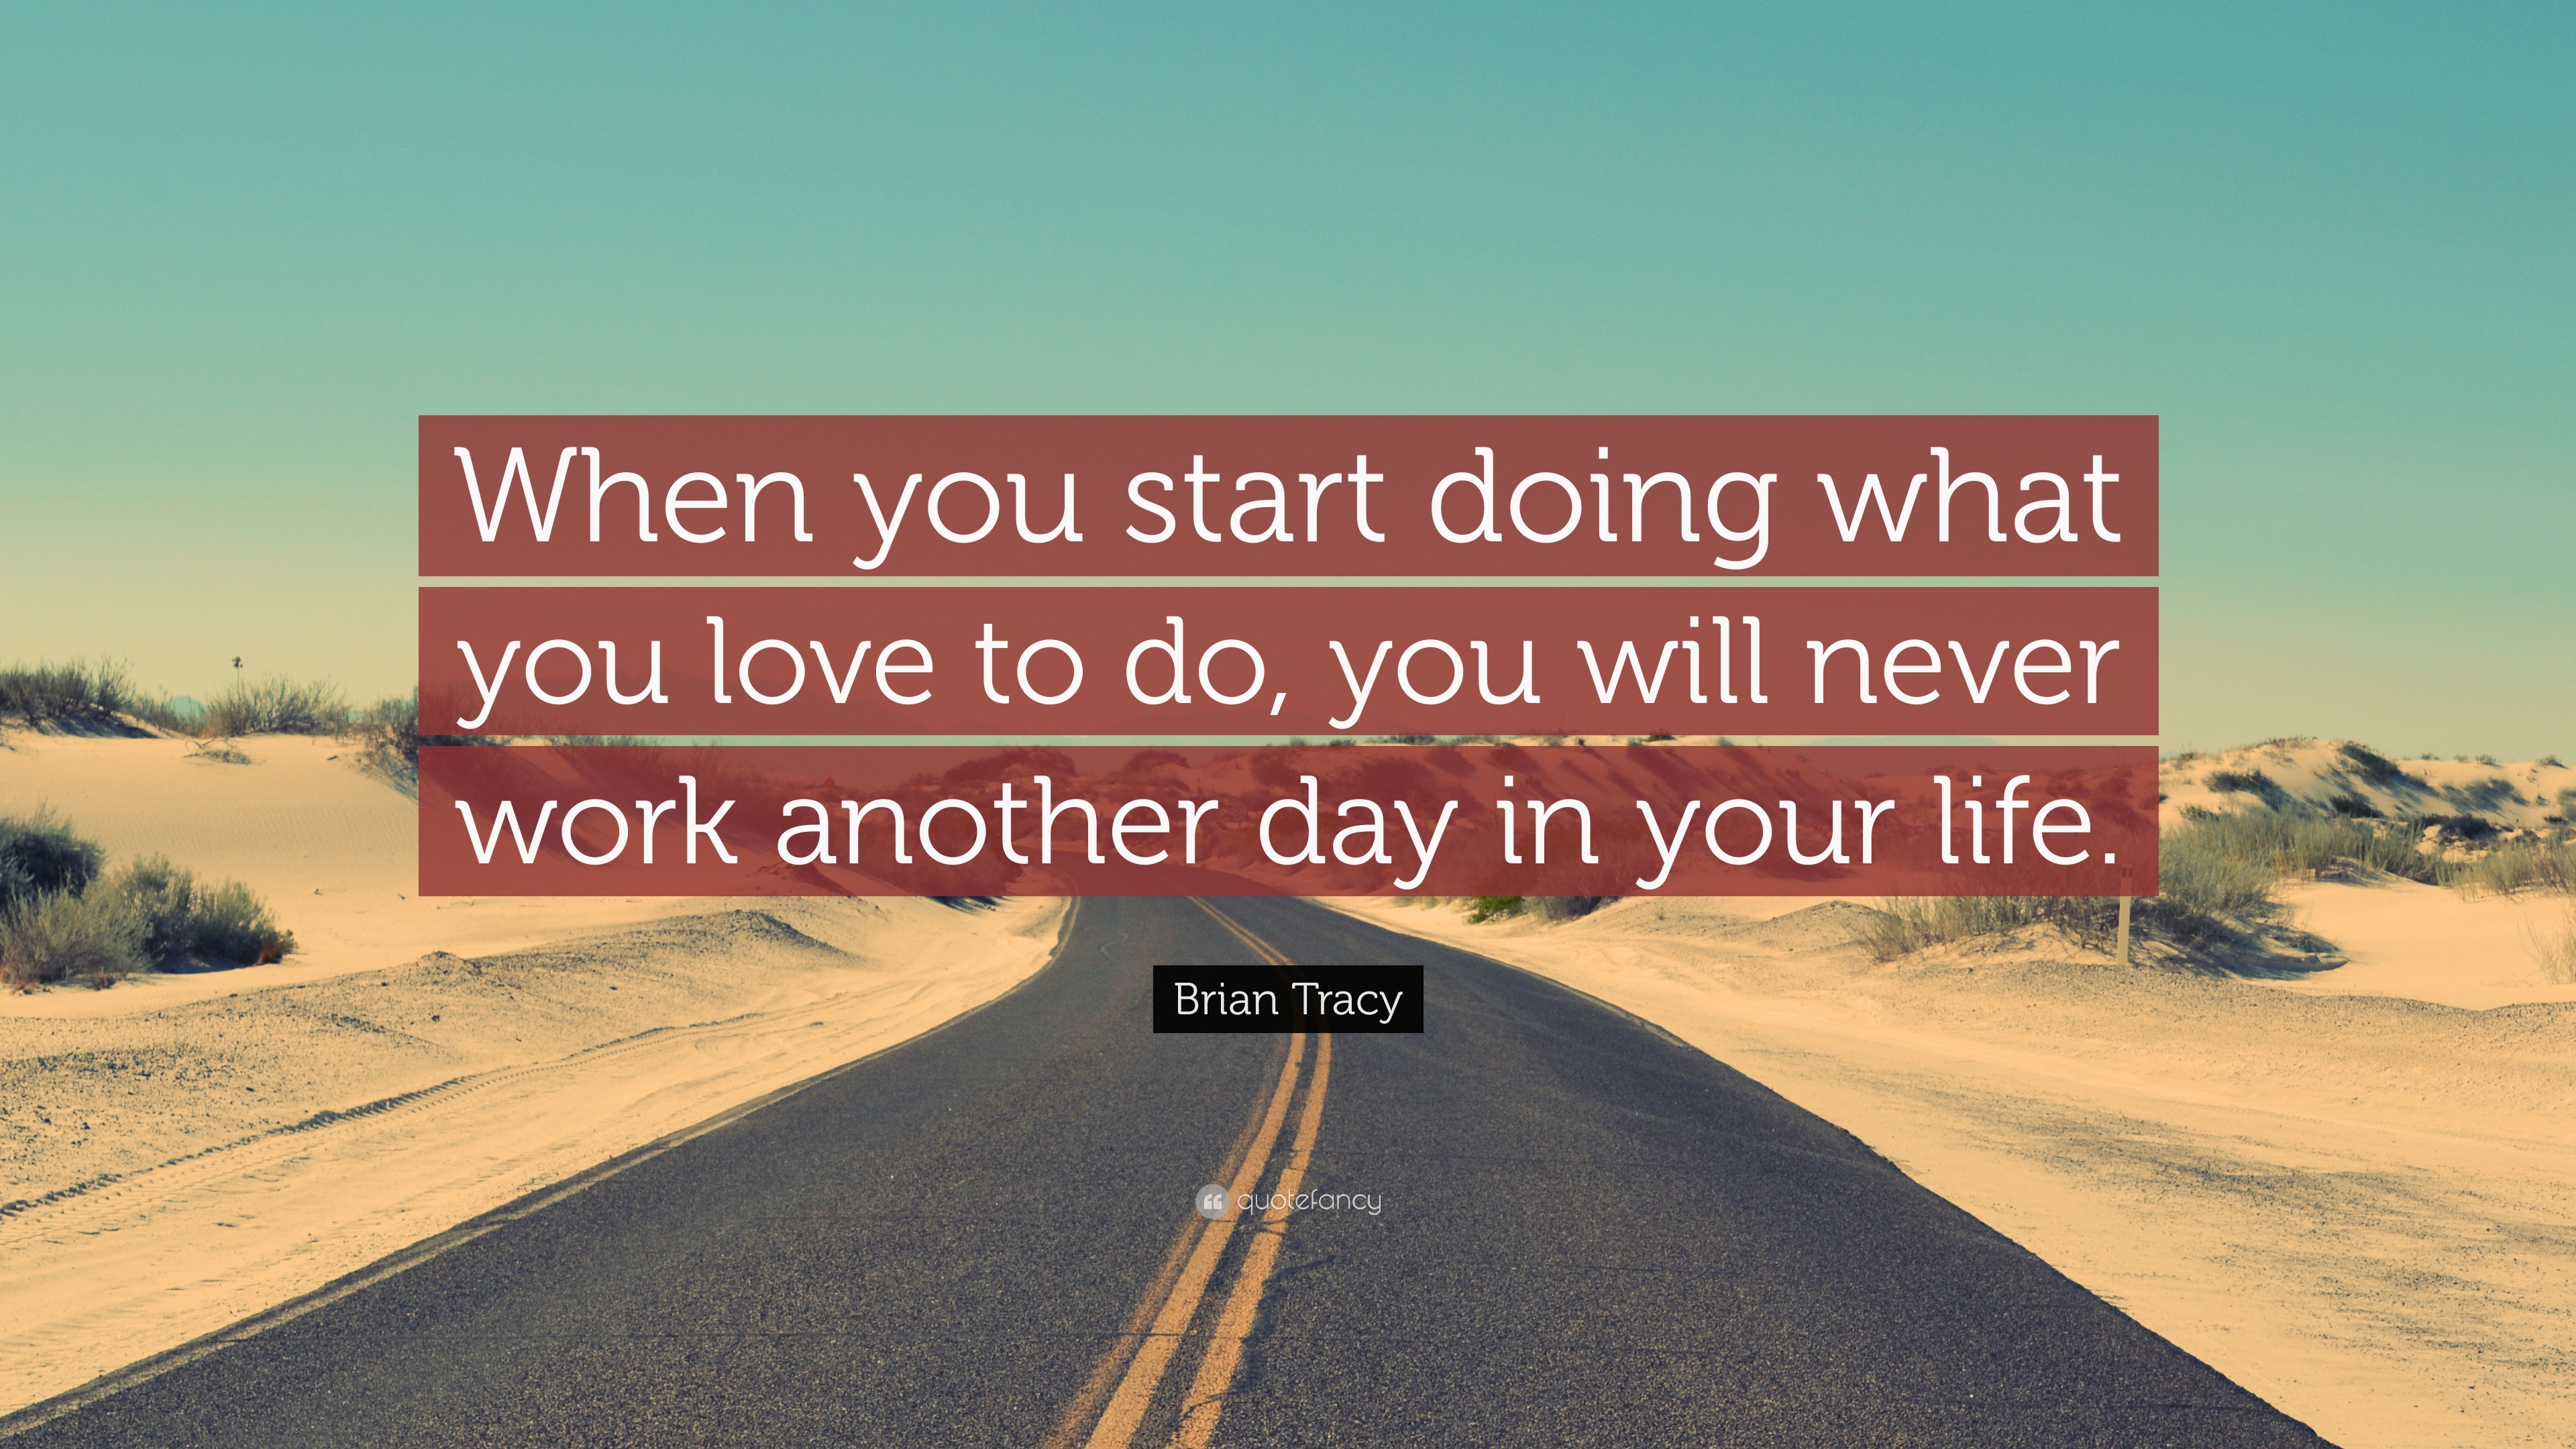 Brian Tracy Quote “When you start doing what you love to do you